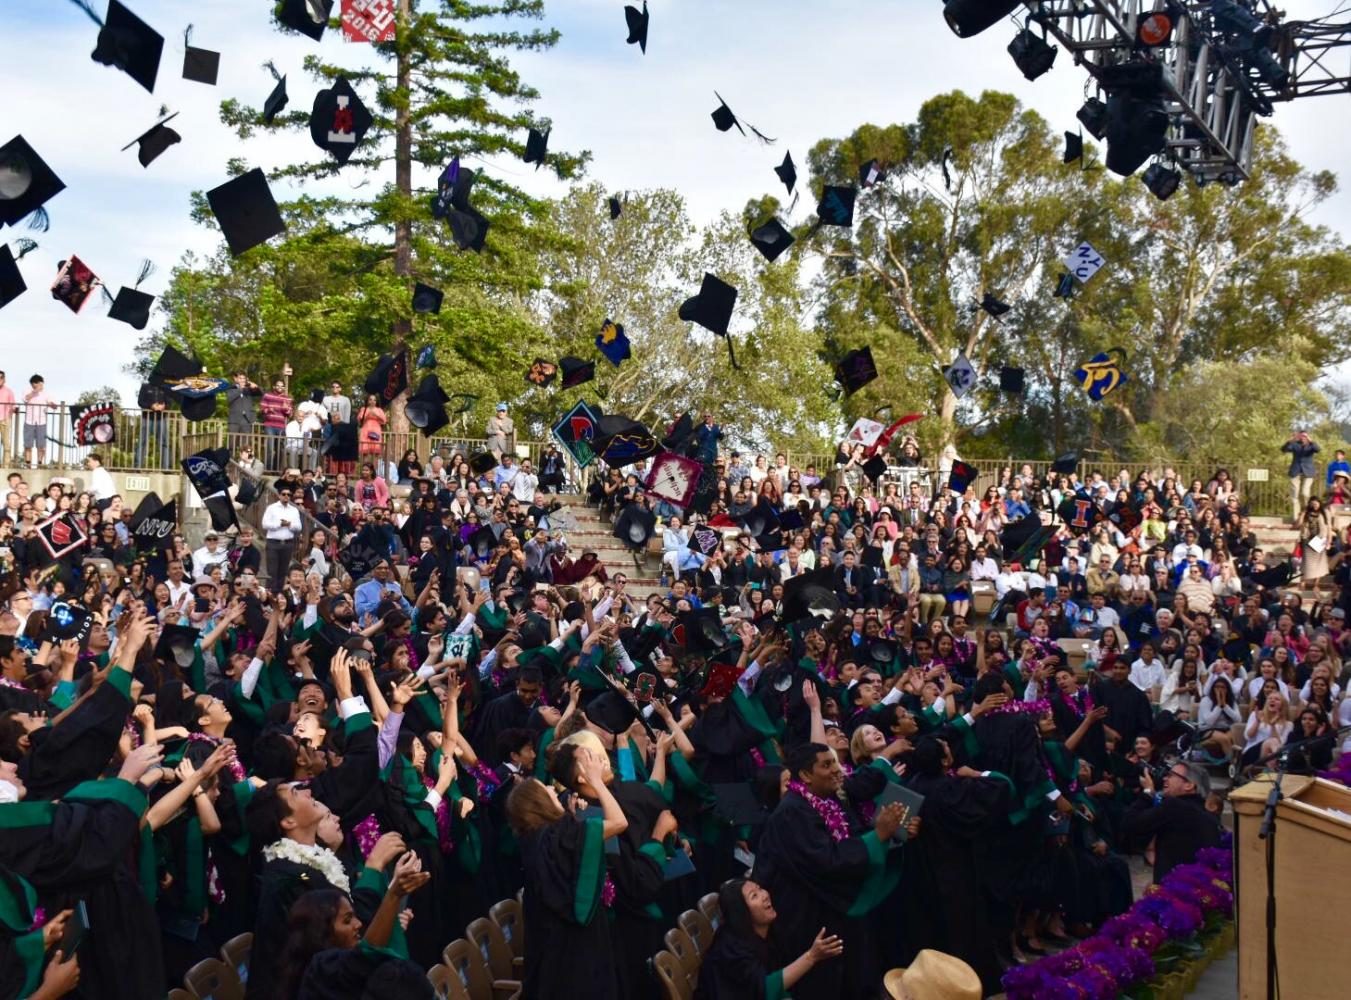 The+class+of+2016+tosses+their+hats+into+the+air+at+last+years+graduation+ceremony+at+the+Saratoga+Mountain+Winery.+This+year%2C+graduation+will+take+place+at+the+Mountain+Winery+on+May+18.